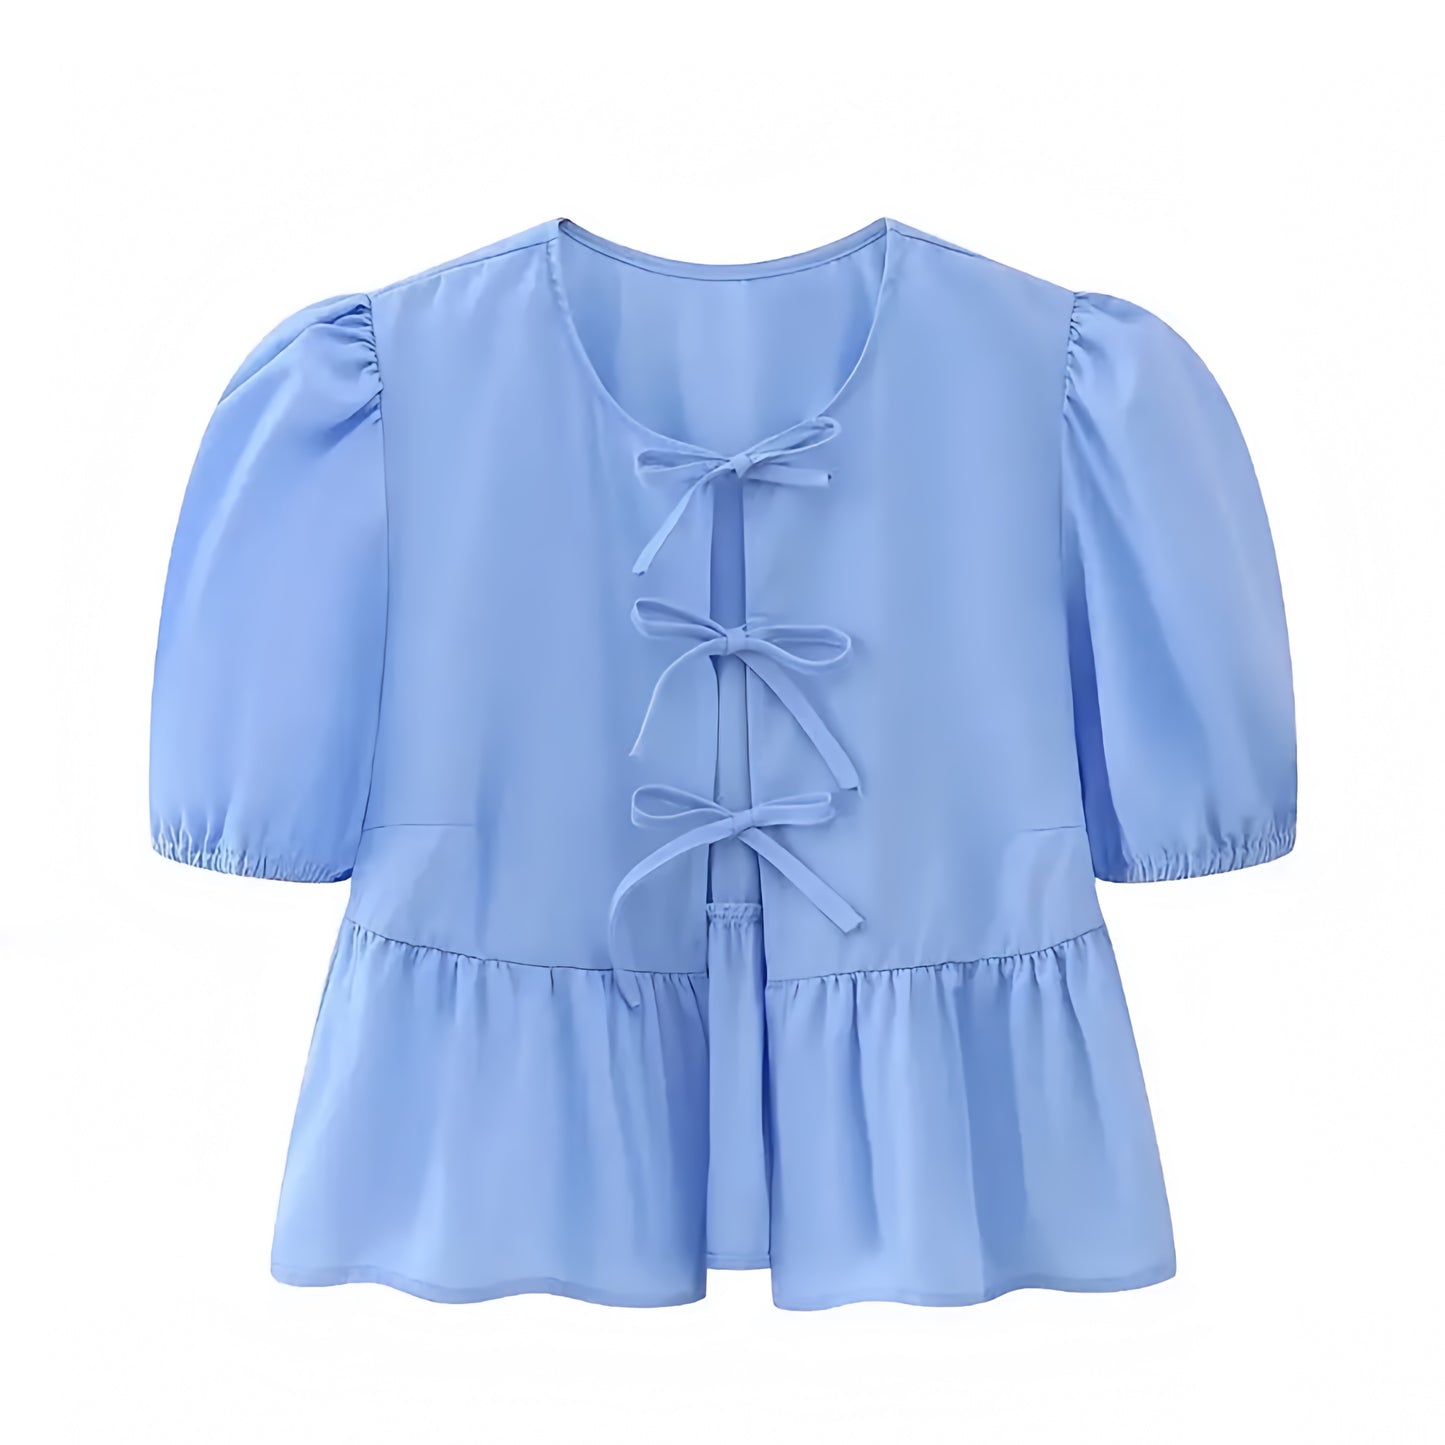 Light Blue Bow Lace Up Short Puff Sleeve Camisole Blouse Top